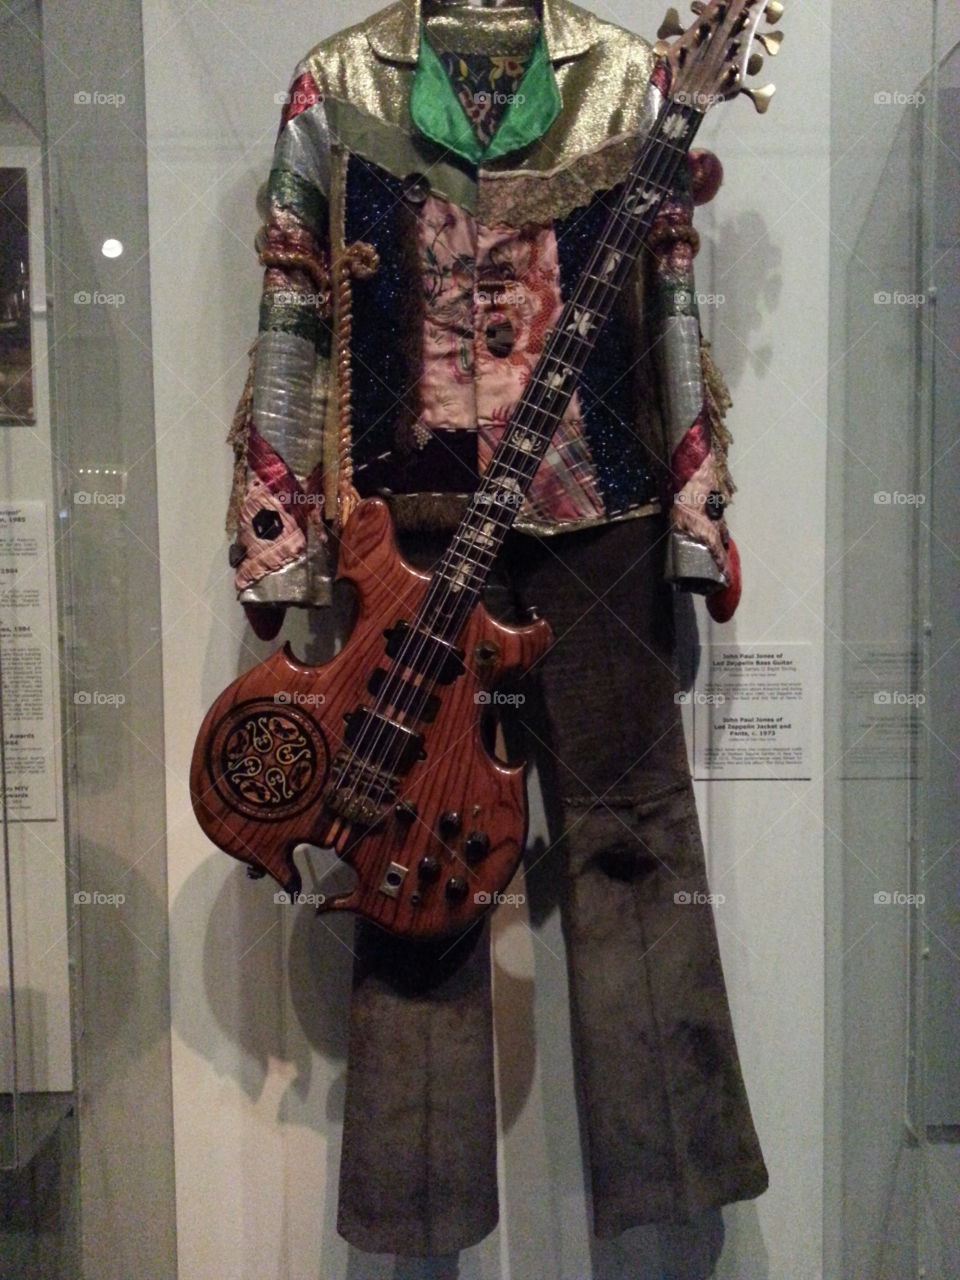 John Paul Jones guitar and stage outfit